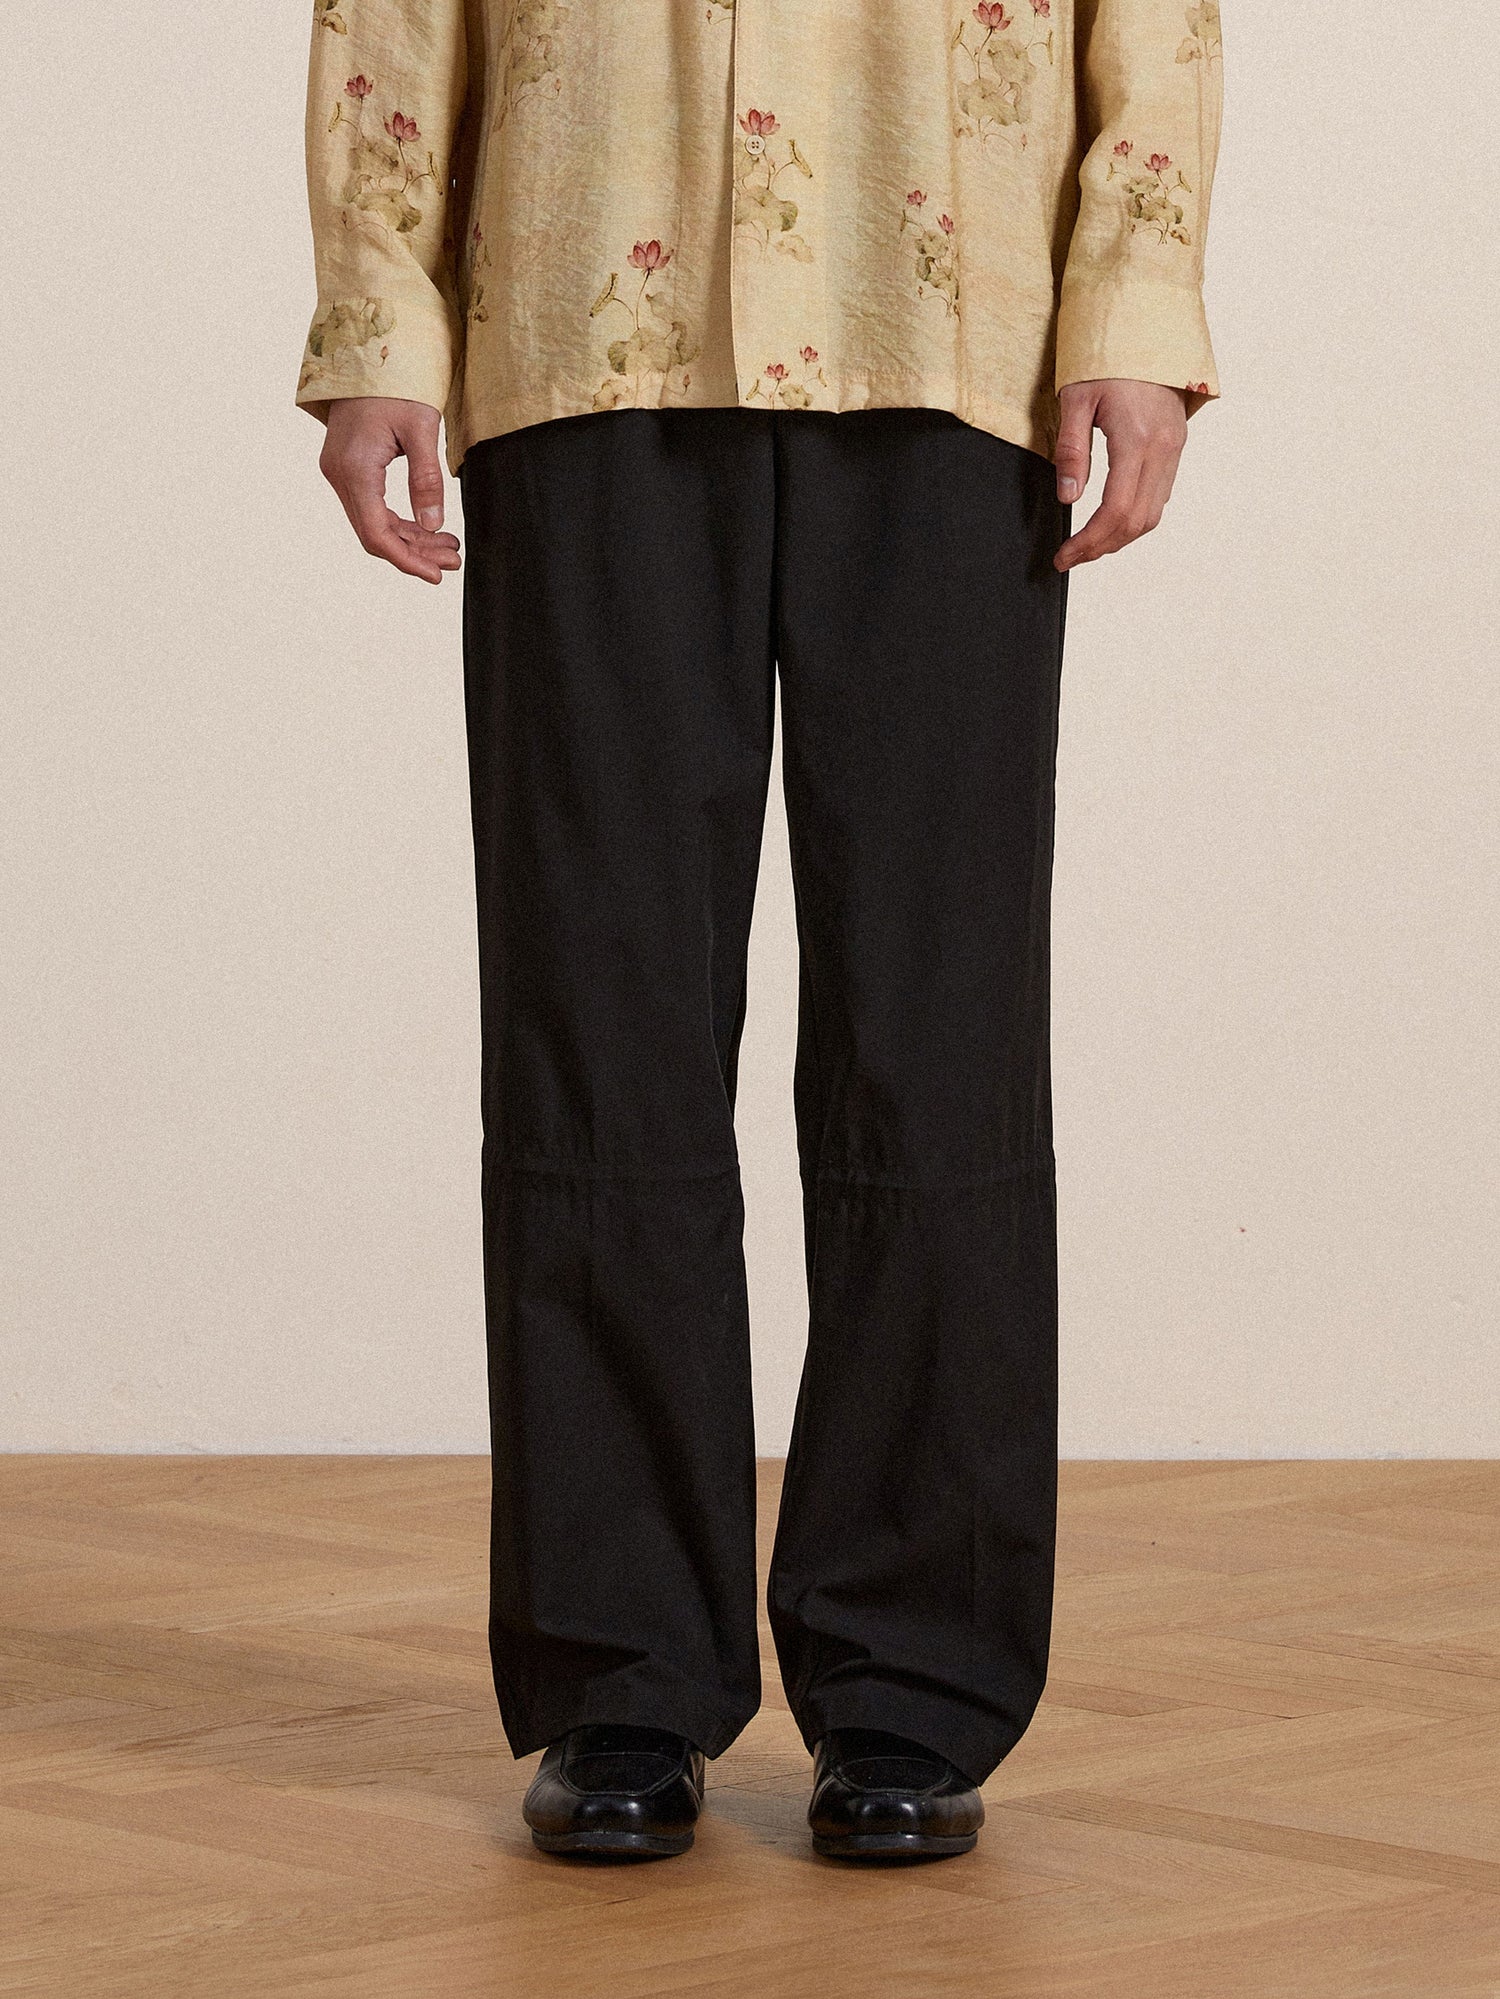 A man wearing a floral shirt and Found nylon pleated pants.